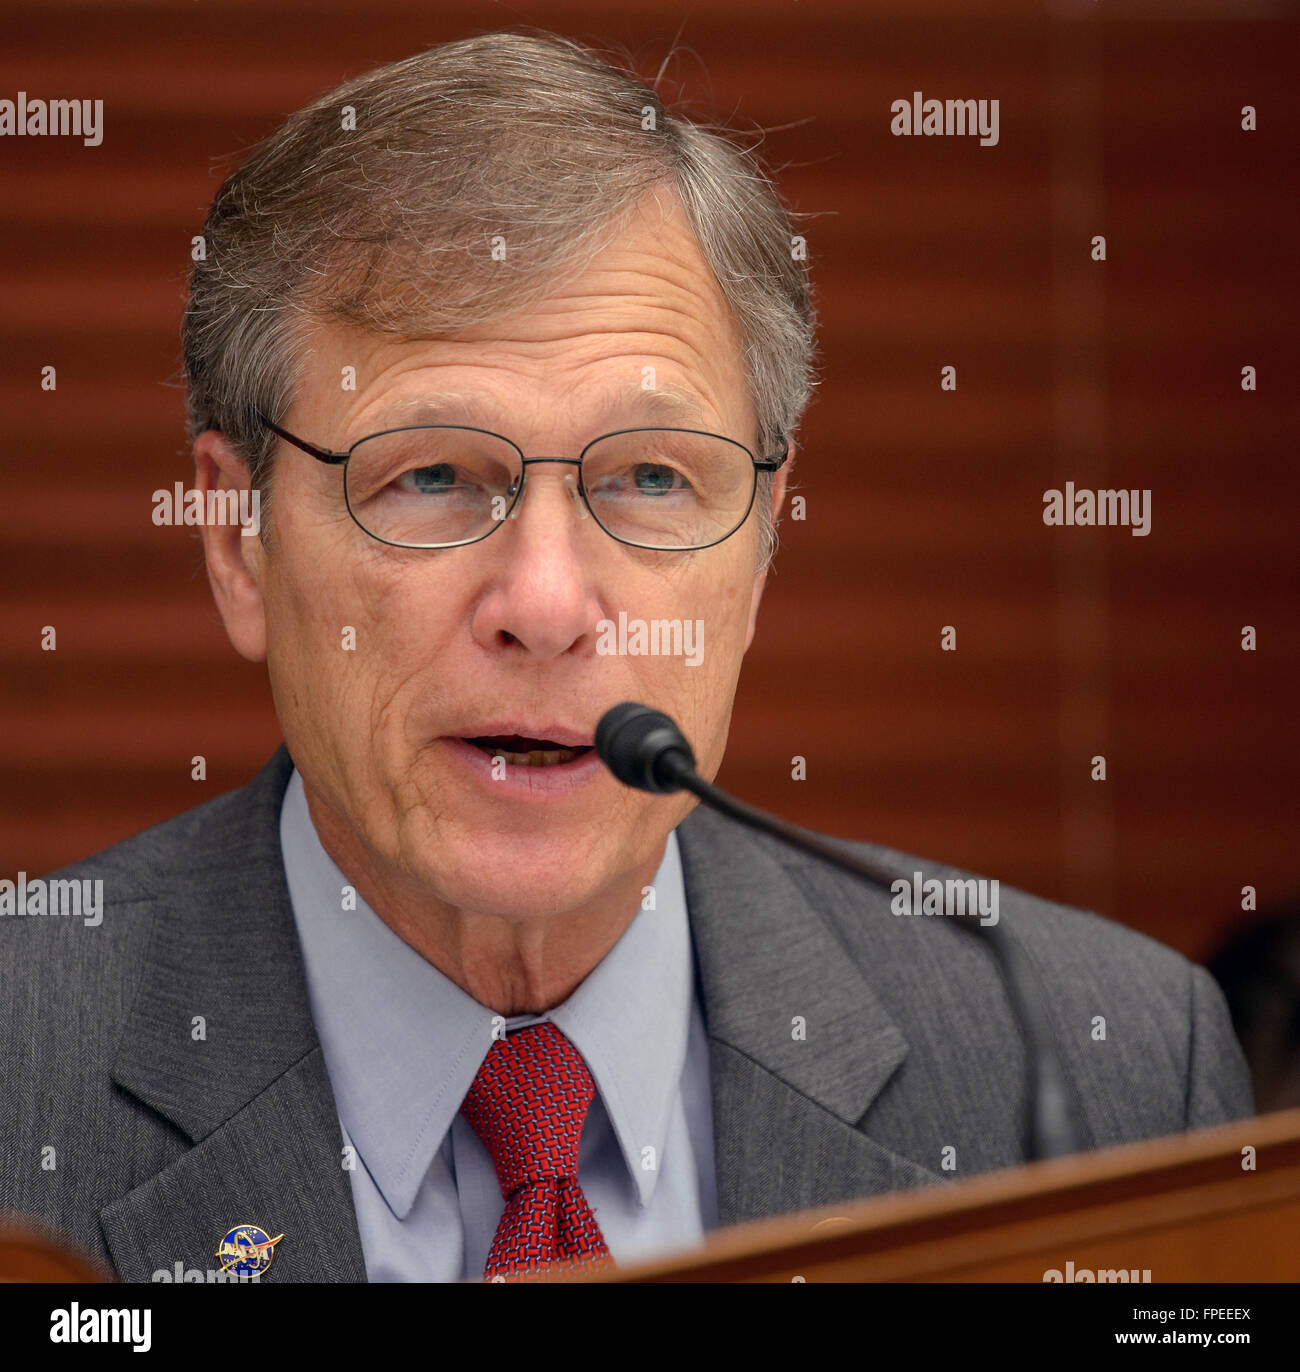 U.S Congressman Brian Babin of Texas during the House Committee on Science, Space, and Technology hearing on the budget for the National Aeronautics and Space Administration at the Rayburn House Office Building on Capitol Hill March 17, 2016 in Washington, DC. Stock Photo